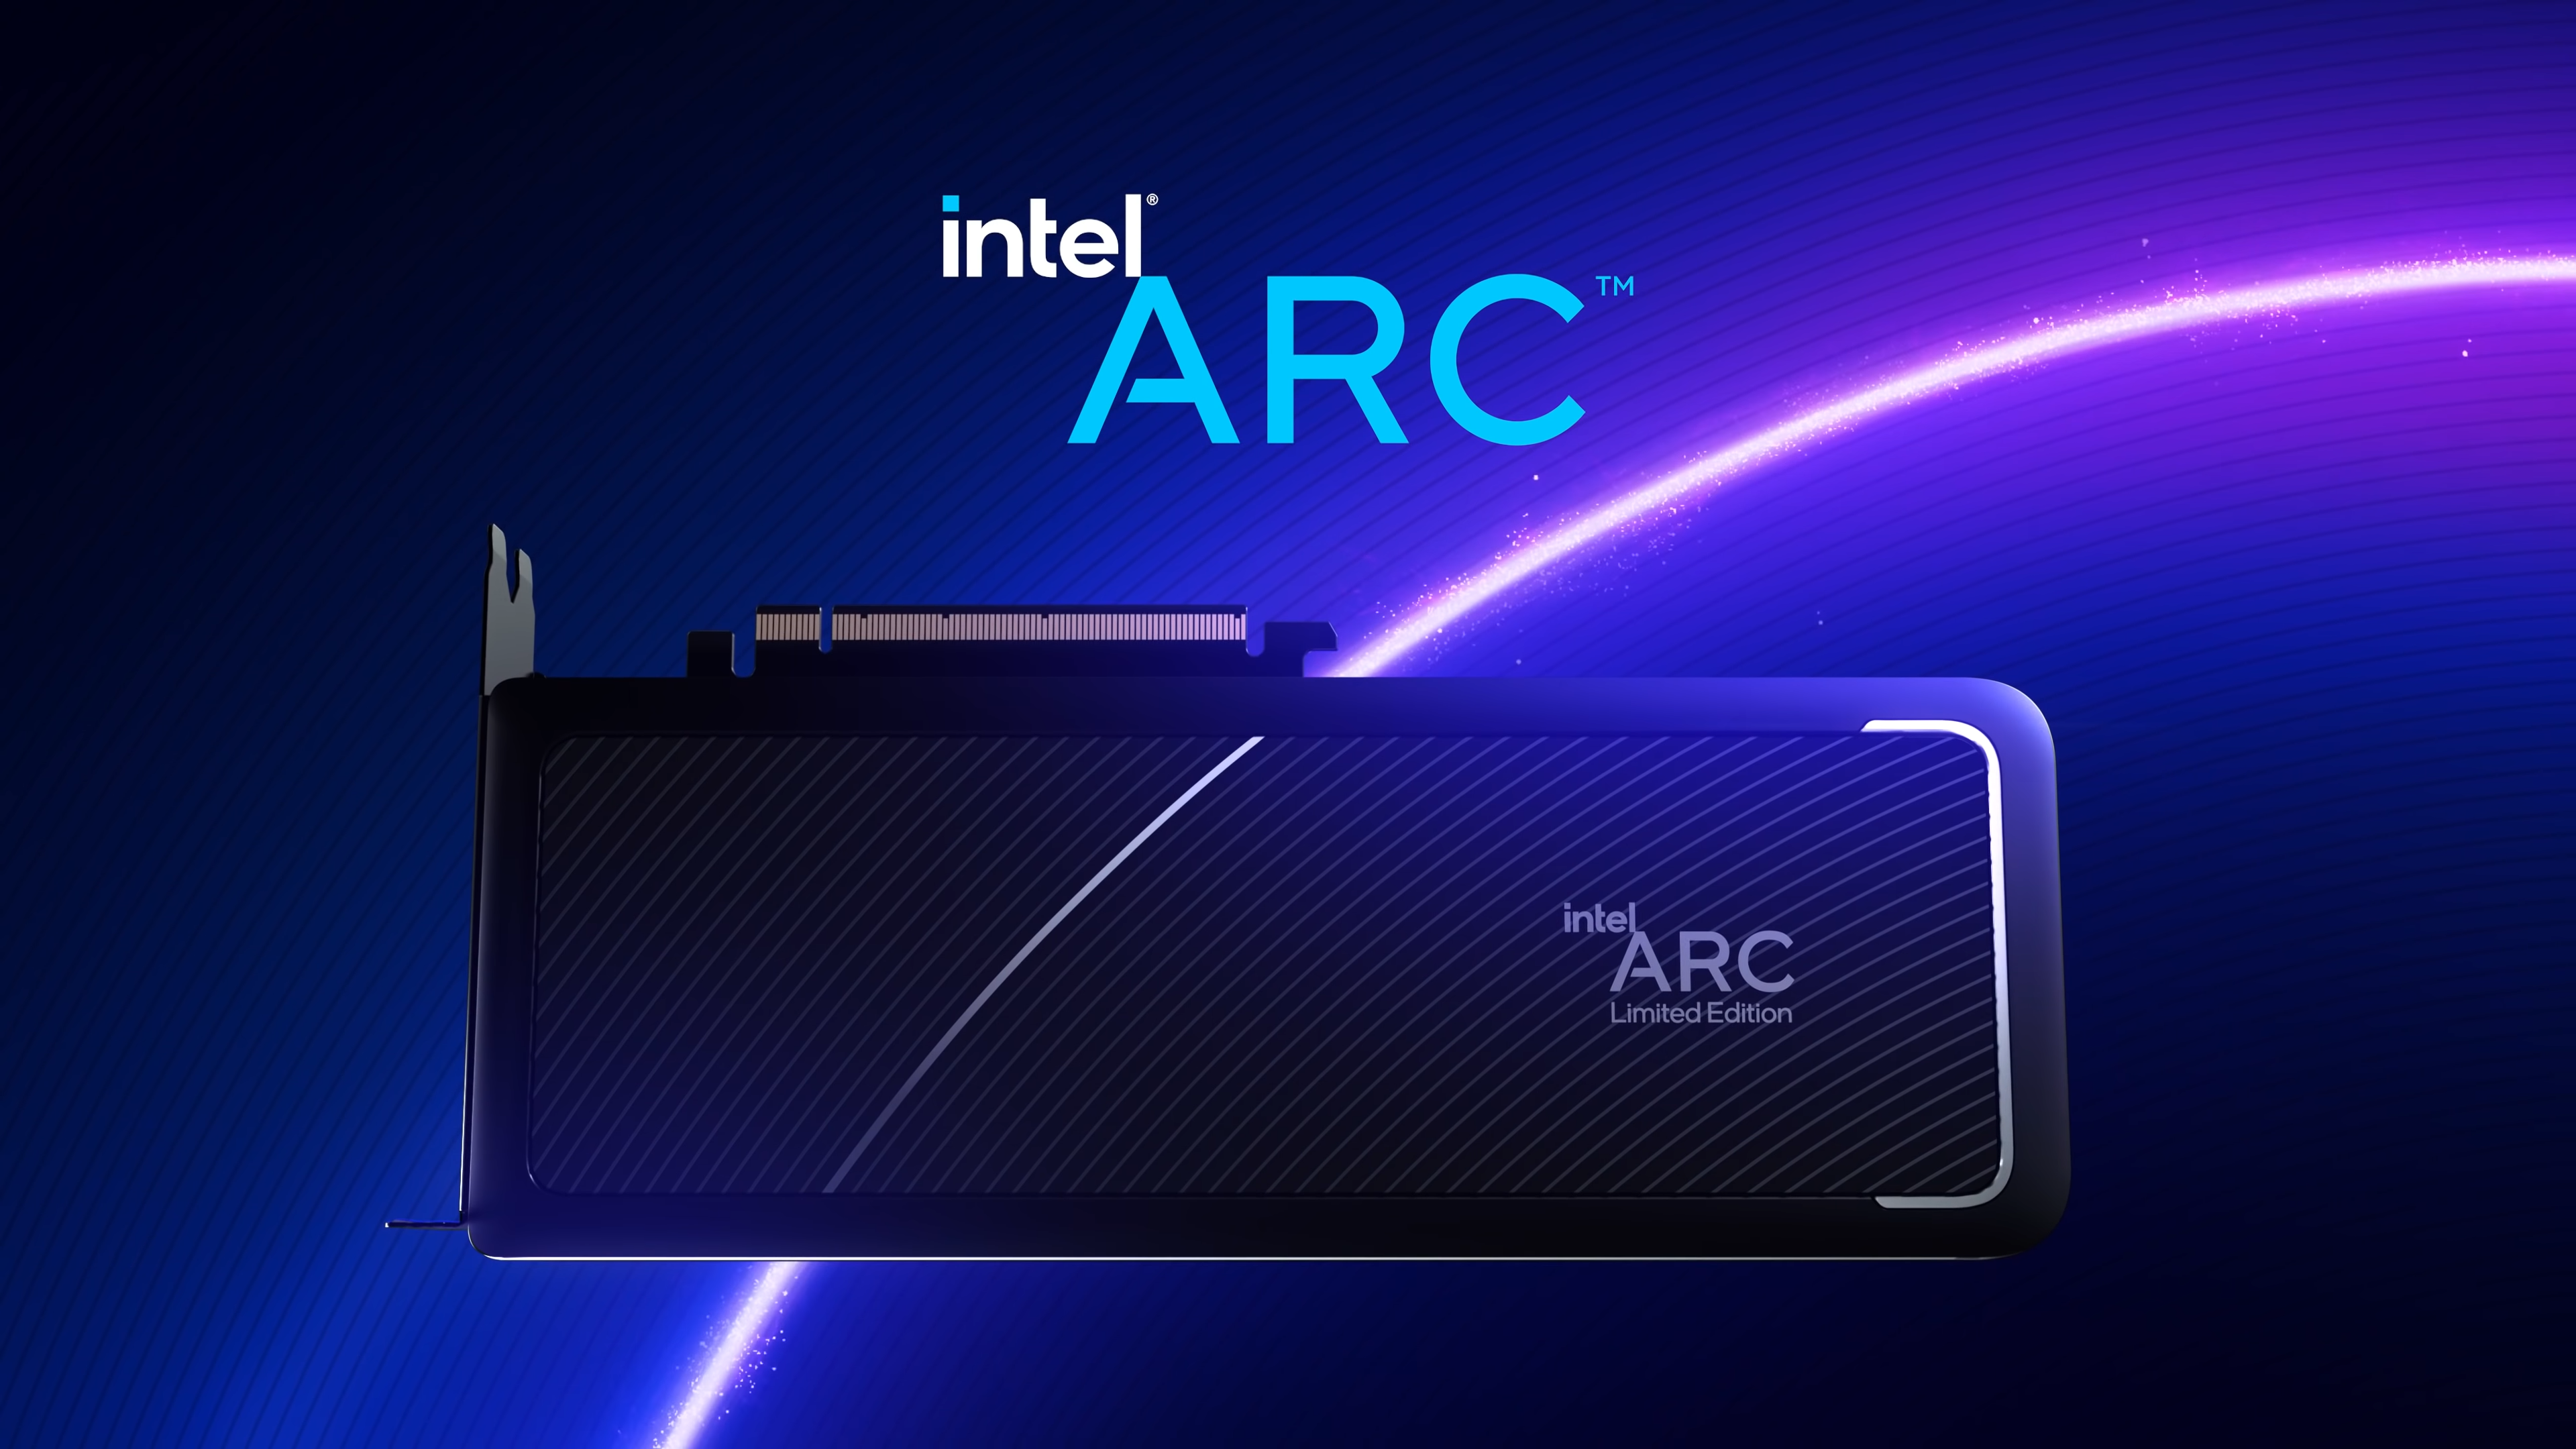 Intel Arc A770 Desktop GPU Spotted on Geekbench Running at 2.4Ghz 